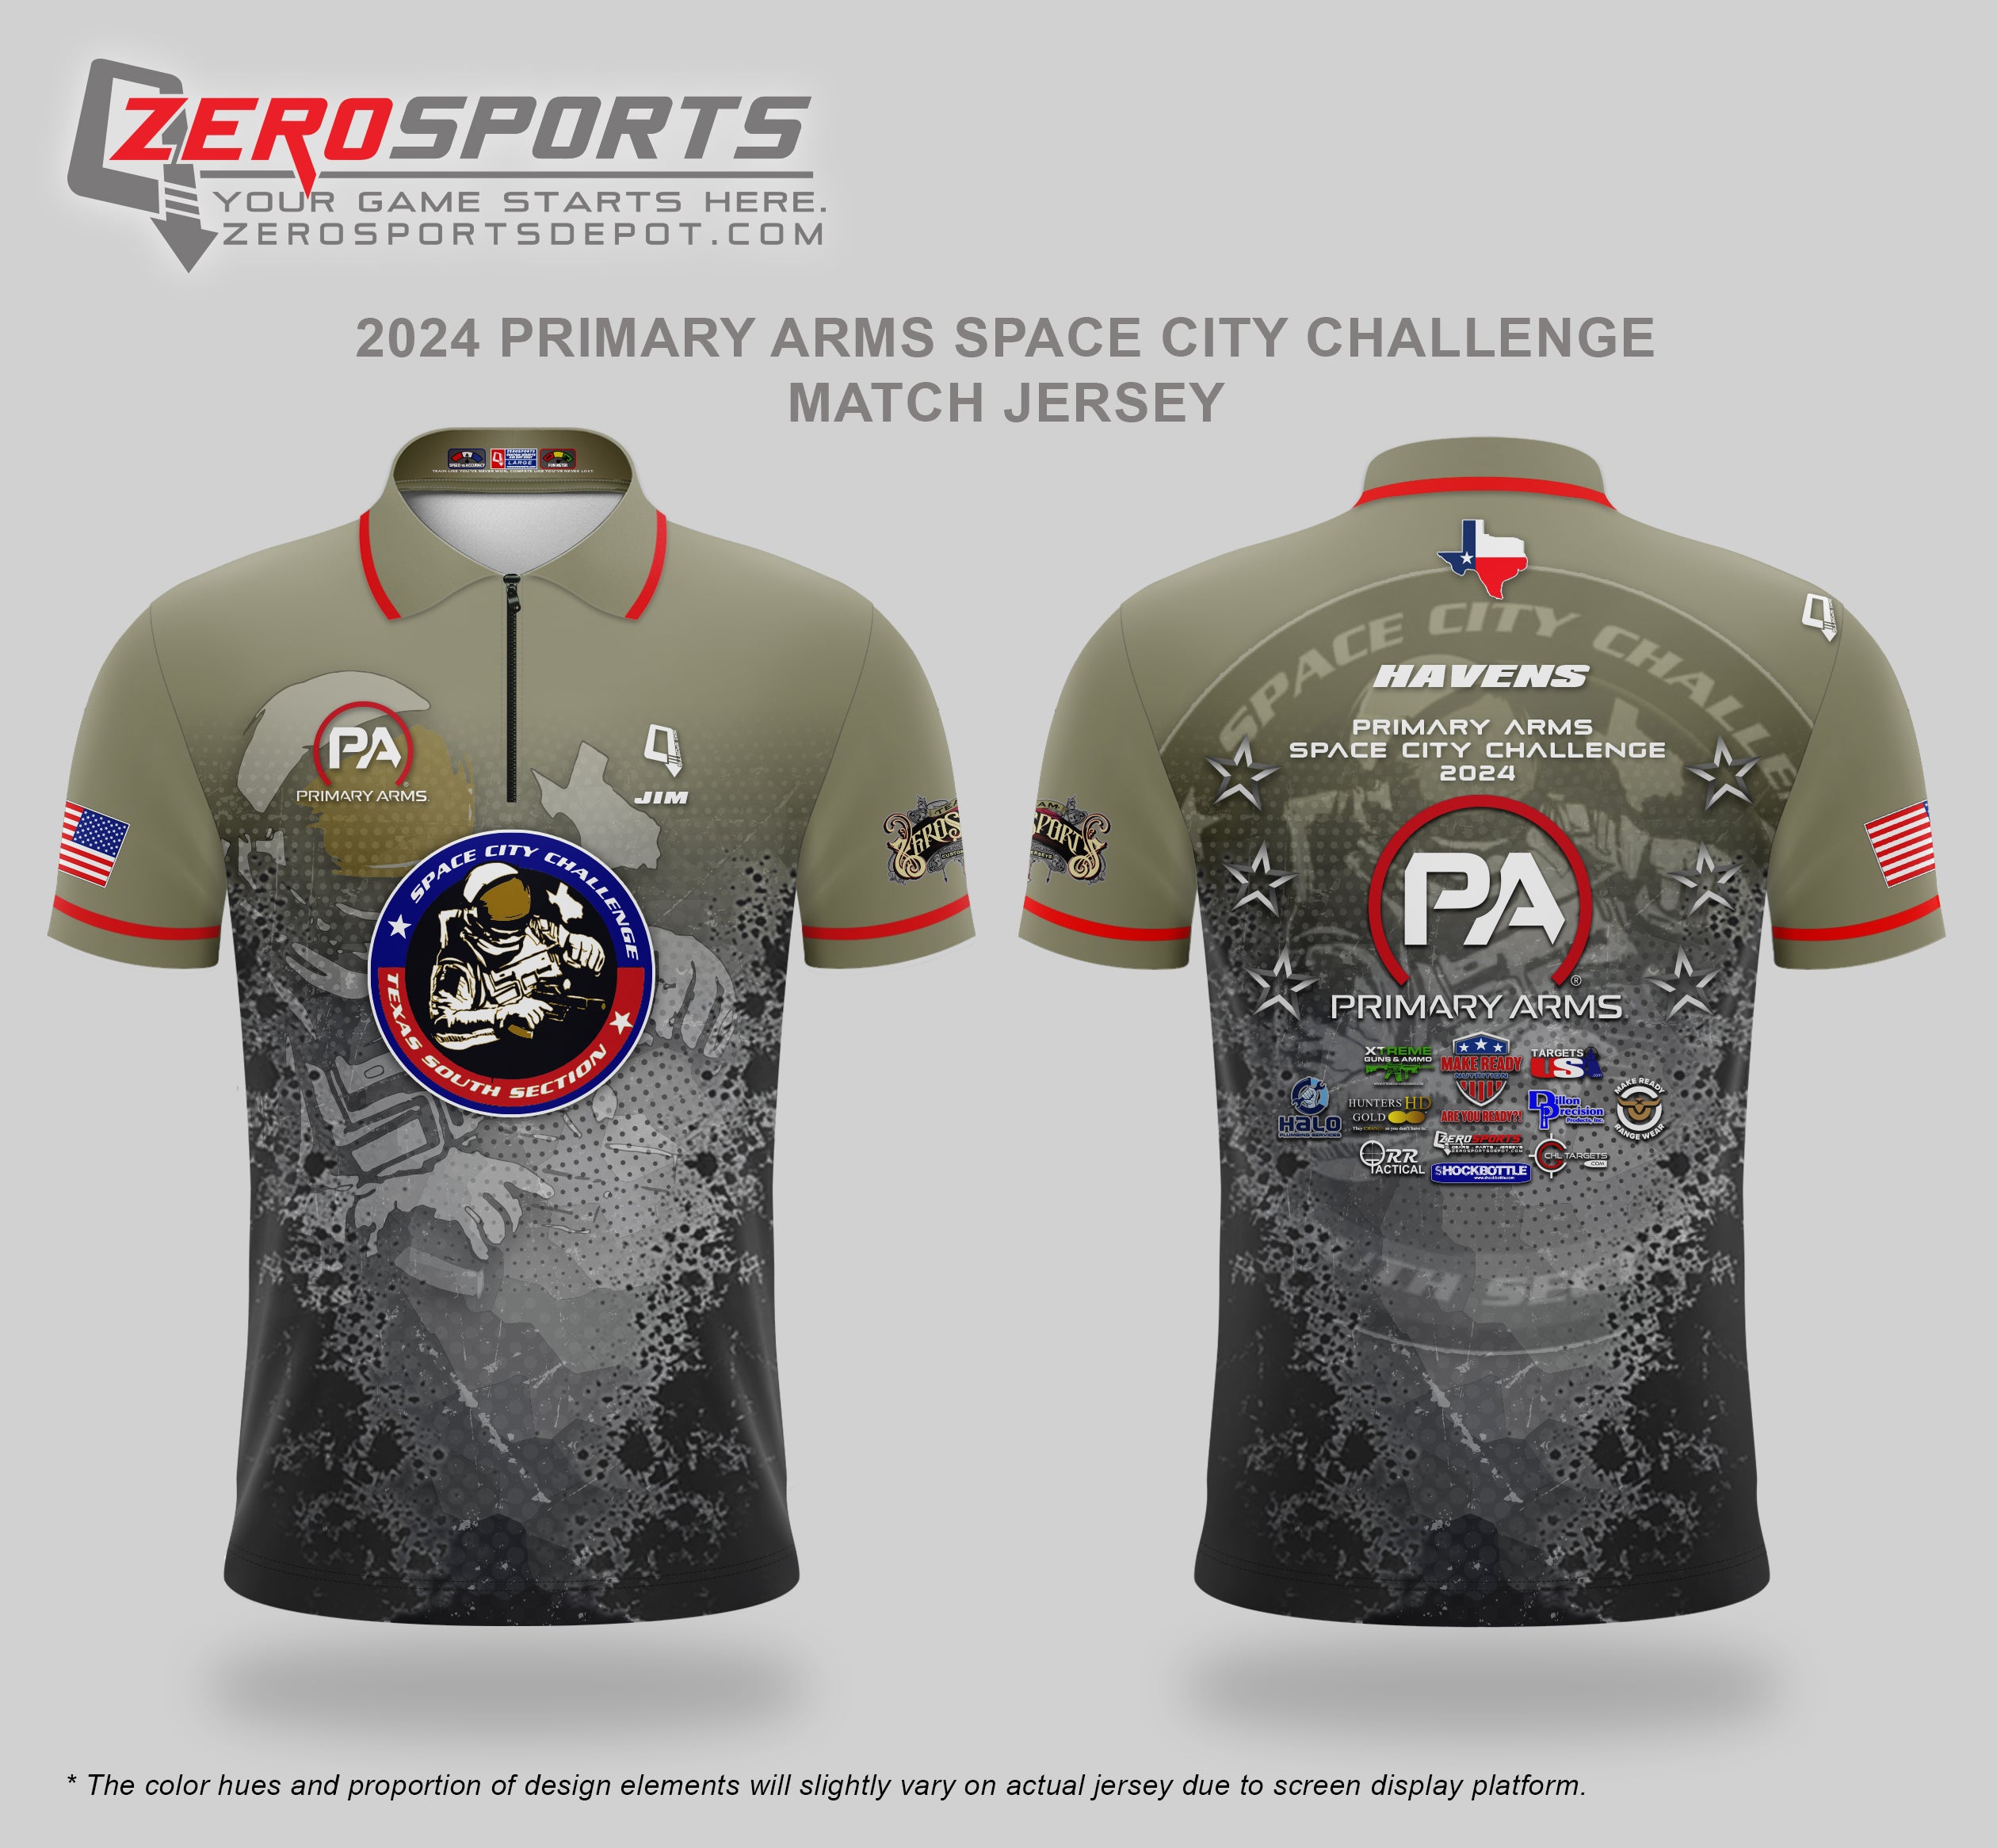 Space City Challenge 2024 Match Jersey **All orders after 5/3/2024 will be shipped directly to your address after the match.